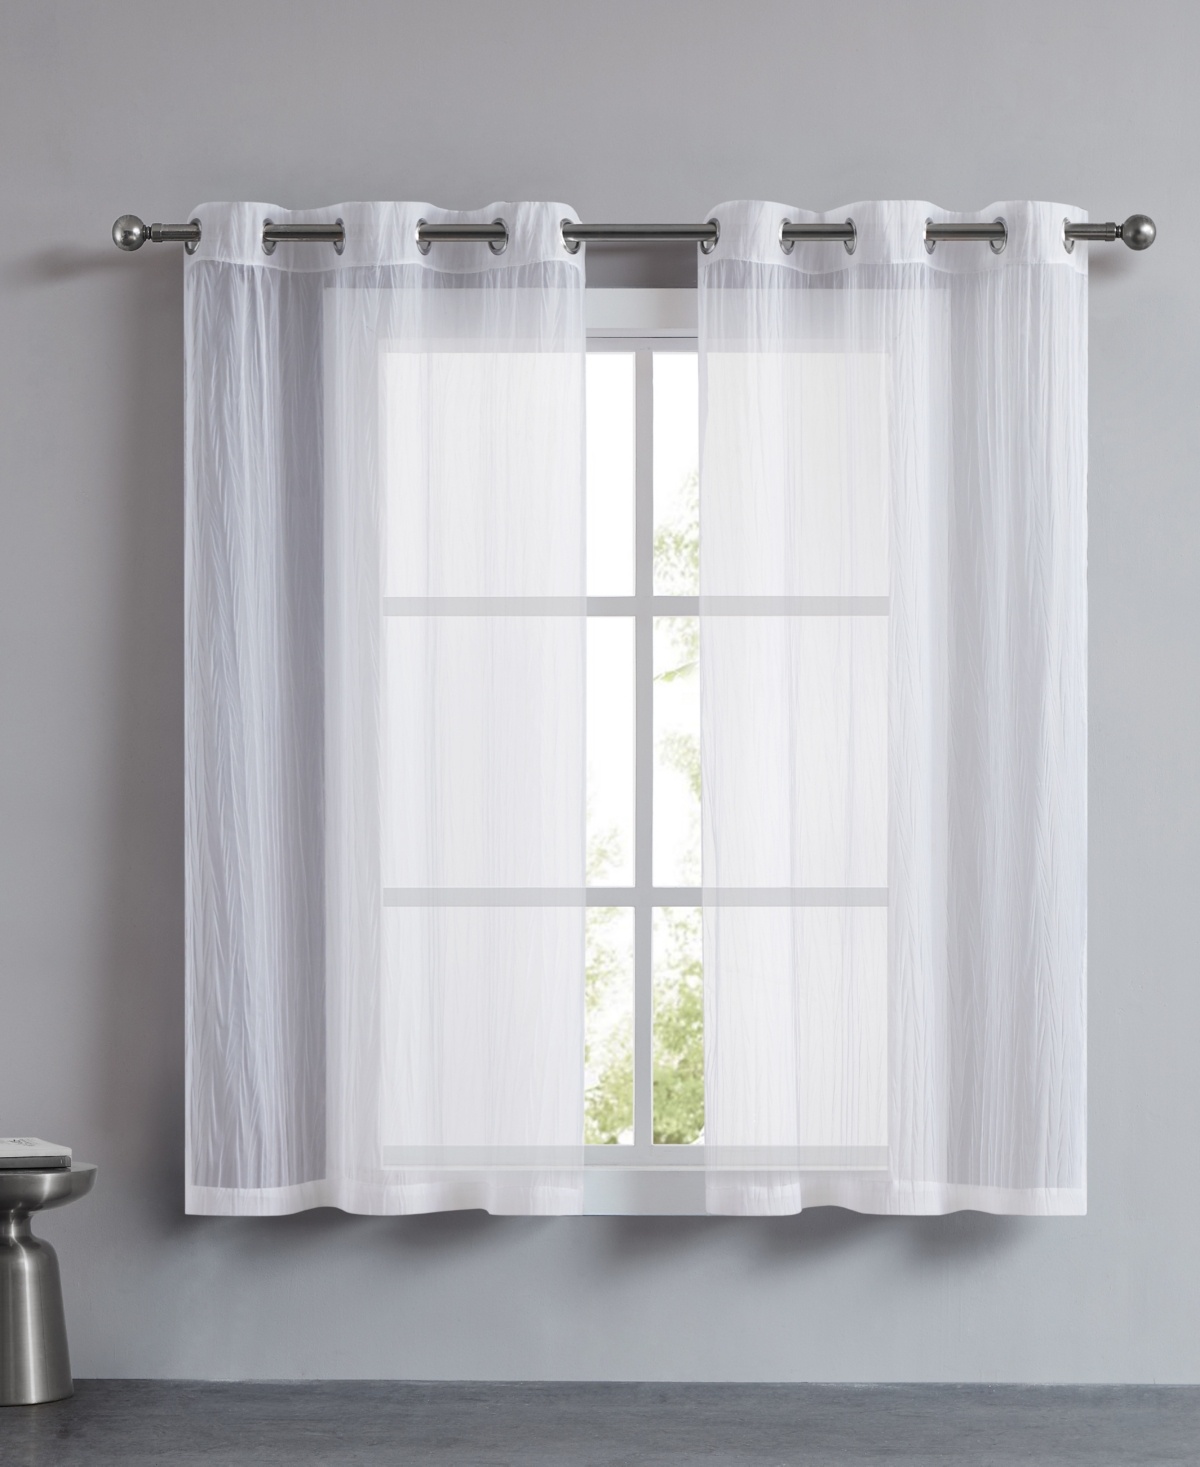 Marnie Crushed Solid Sheer Voile Grommet Window Curtain Panel Set, 38" x 63" - Light Gray